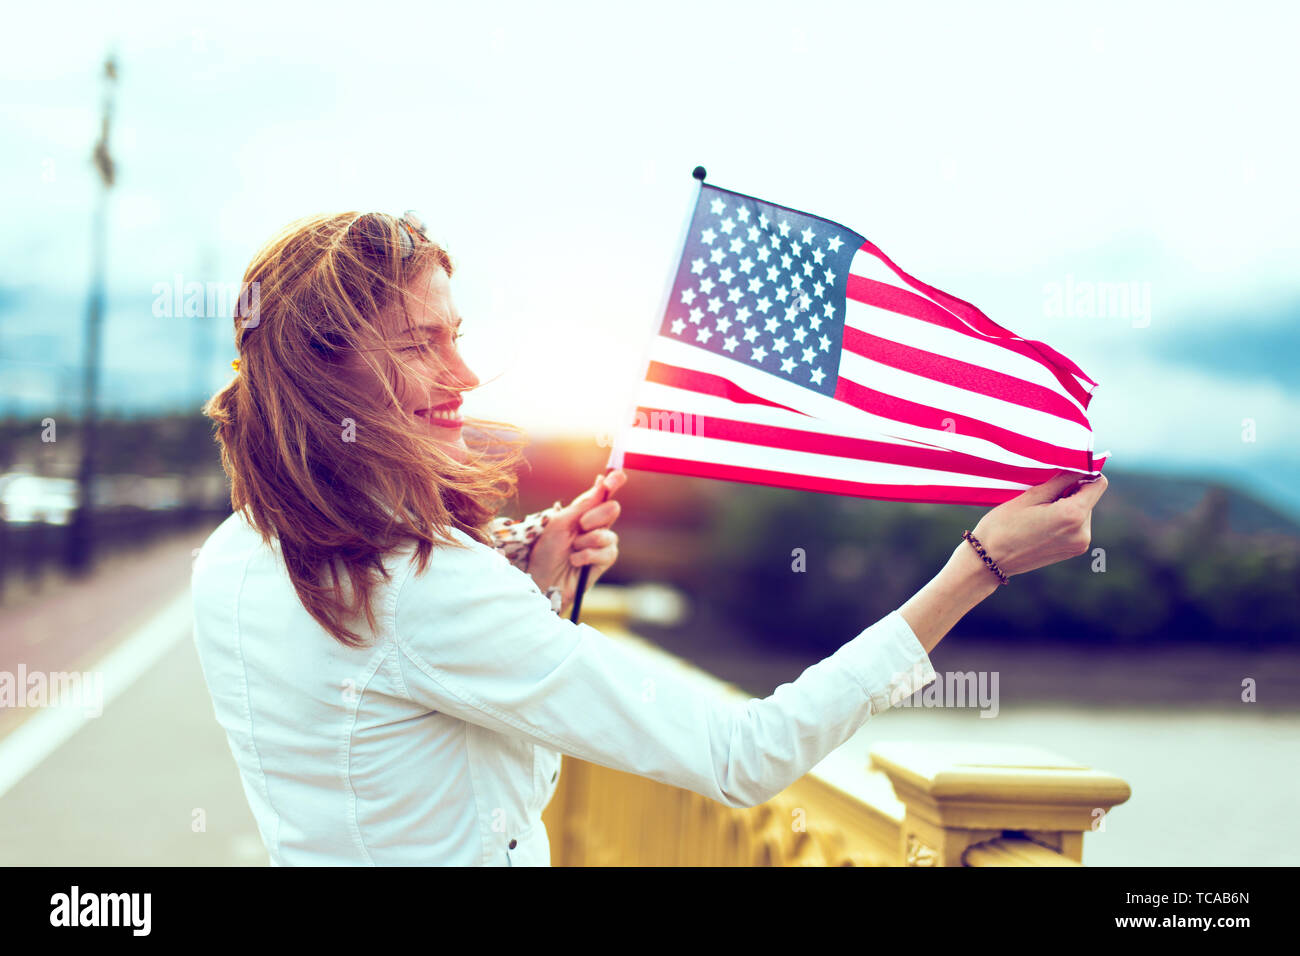 Happy young patriot urban woman with toothy smile stretching USA flag, profile view, with sunlight Stock Photo